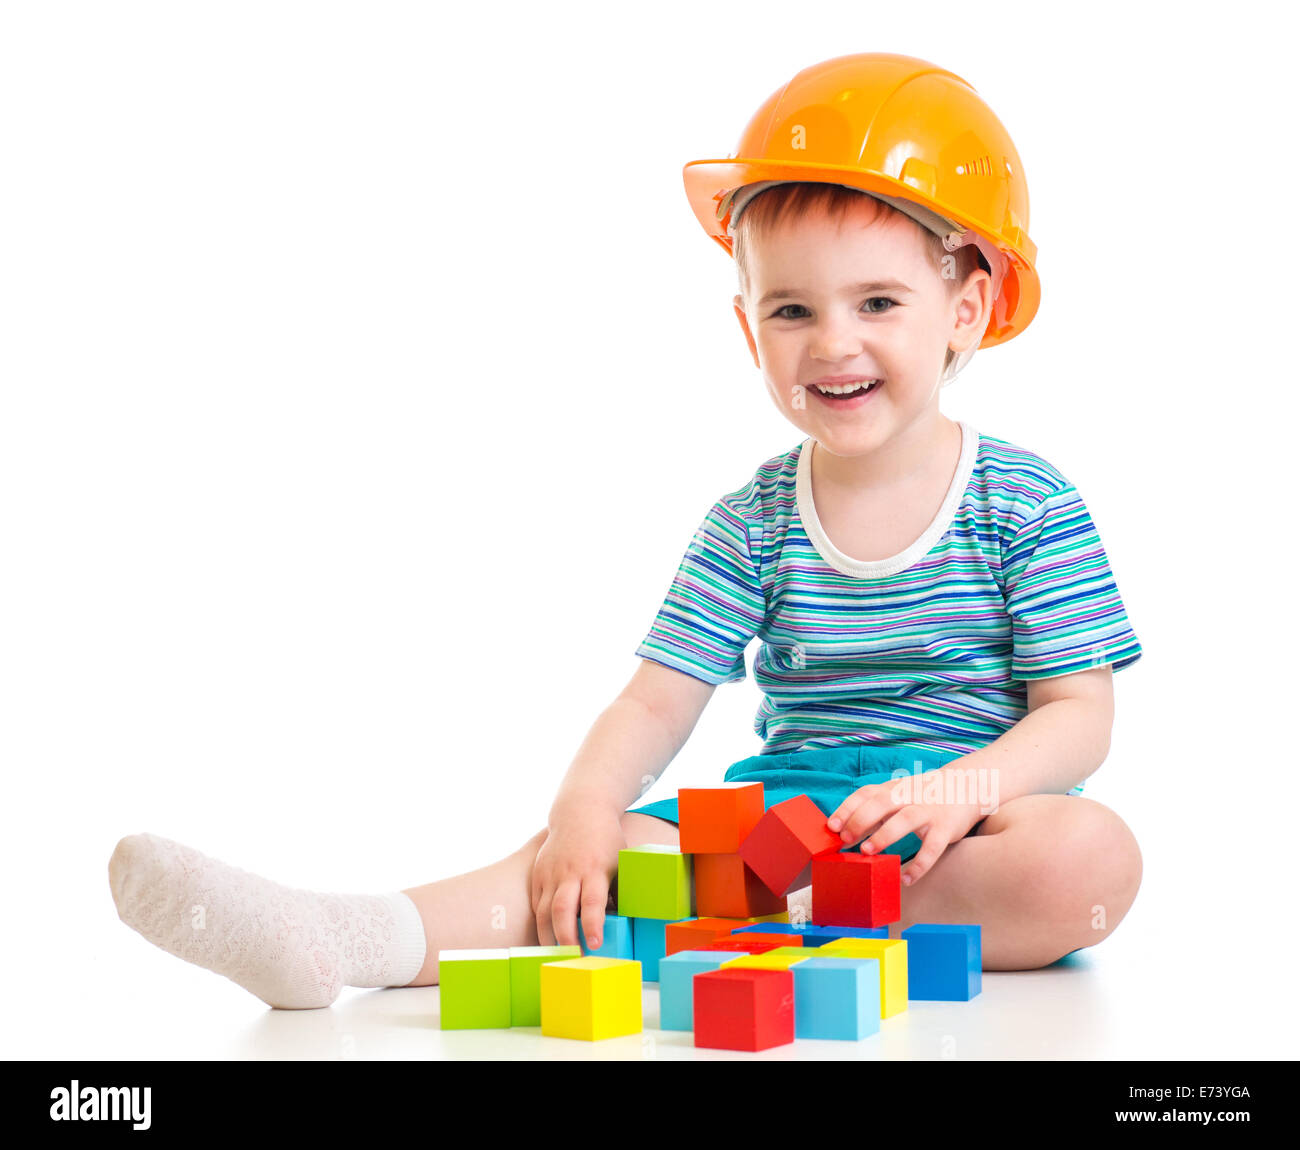 kid boy in hard hat with colorful building blocks Stock Photo